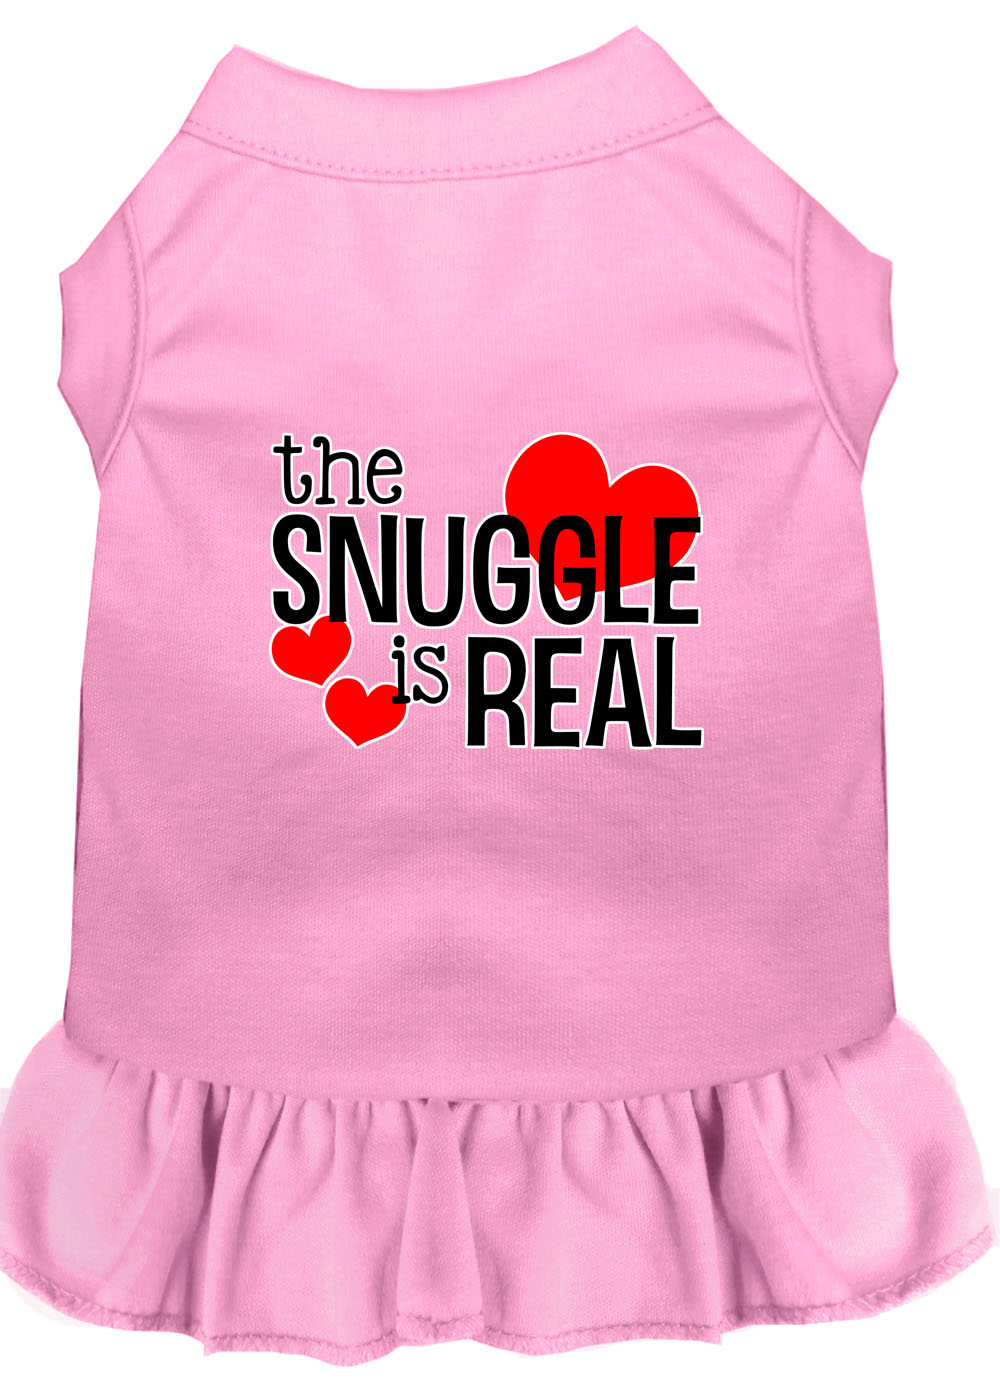 The Snuggle is Real Screen Print Dog Dress Light Pink Med